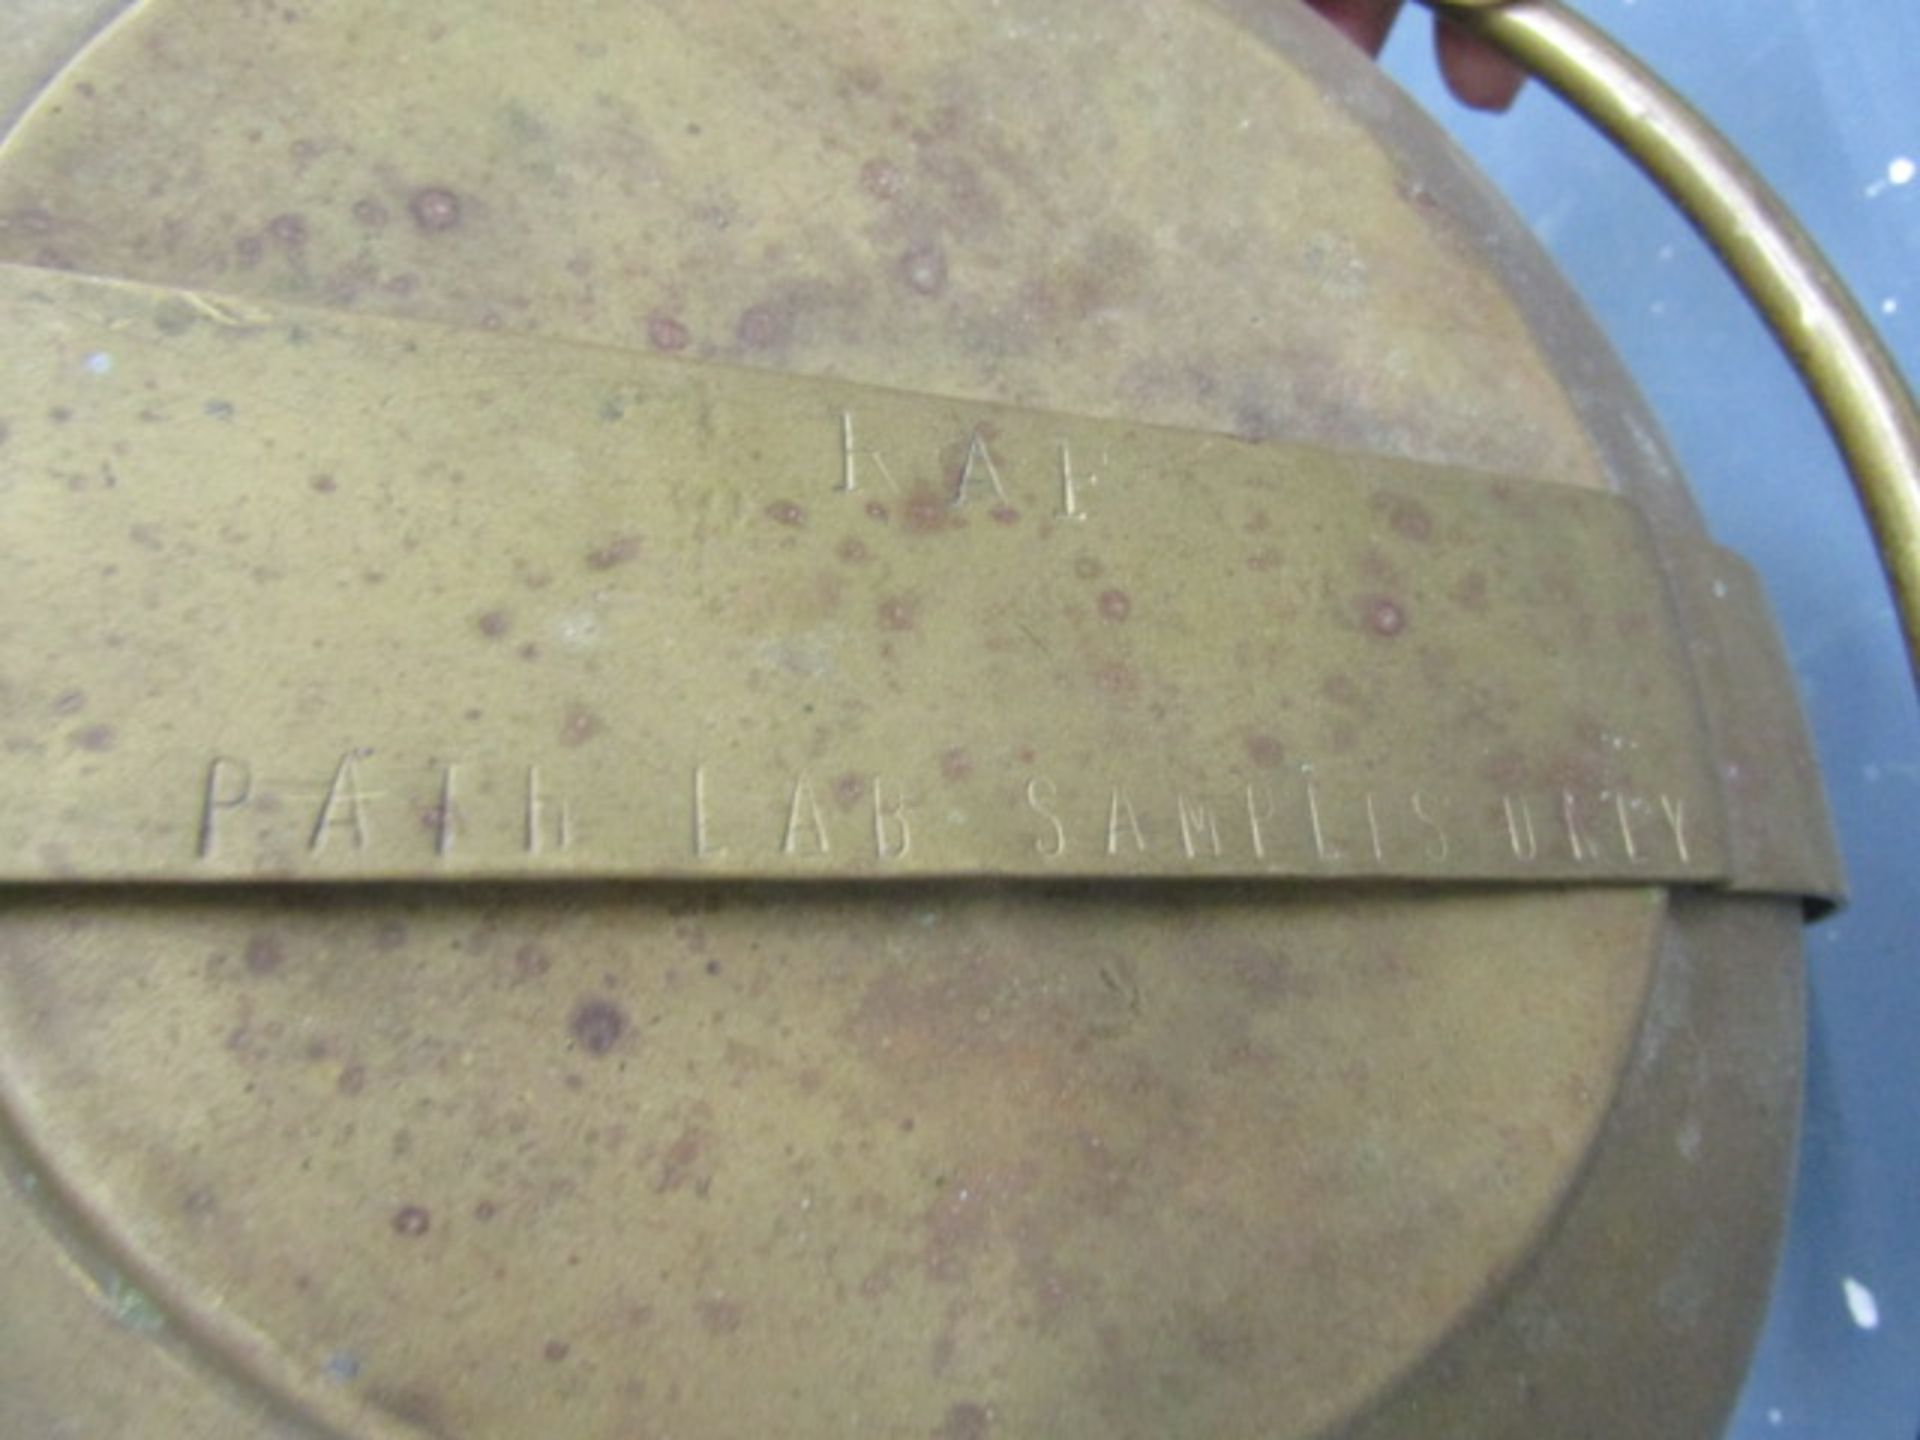 RAF path lab brass samples container - Image 3 of 5